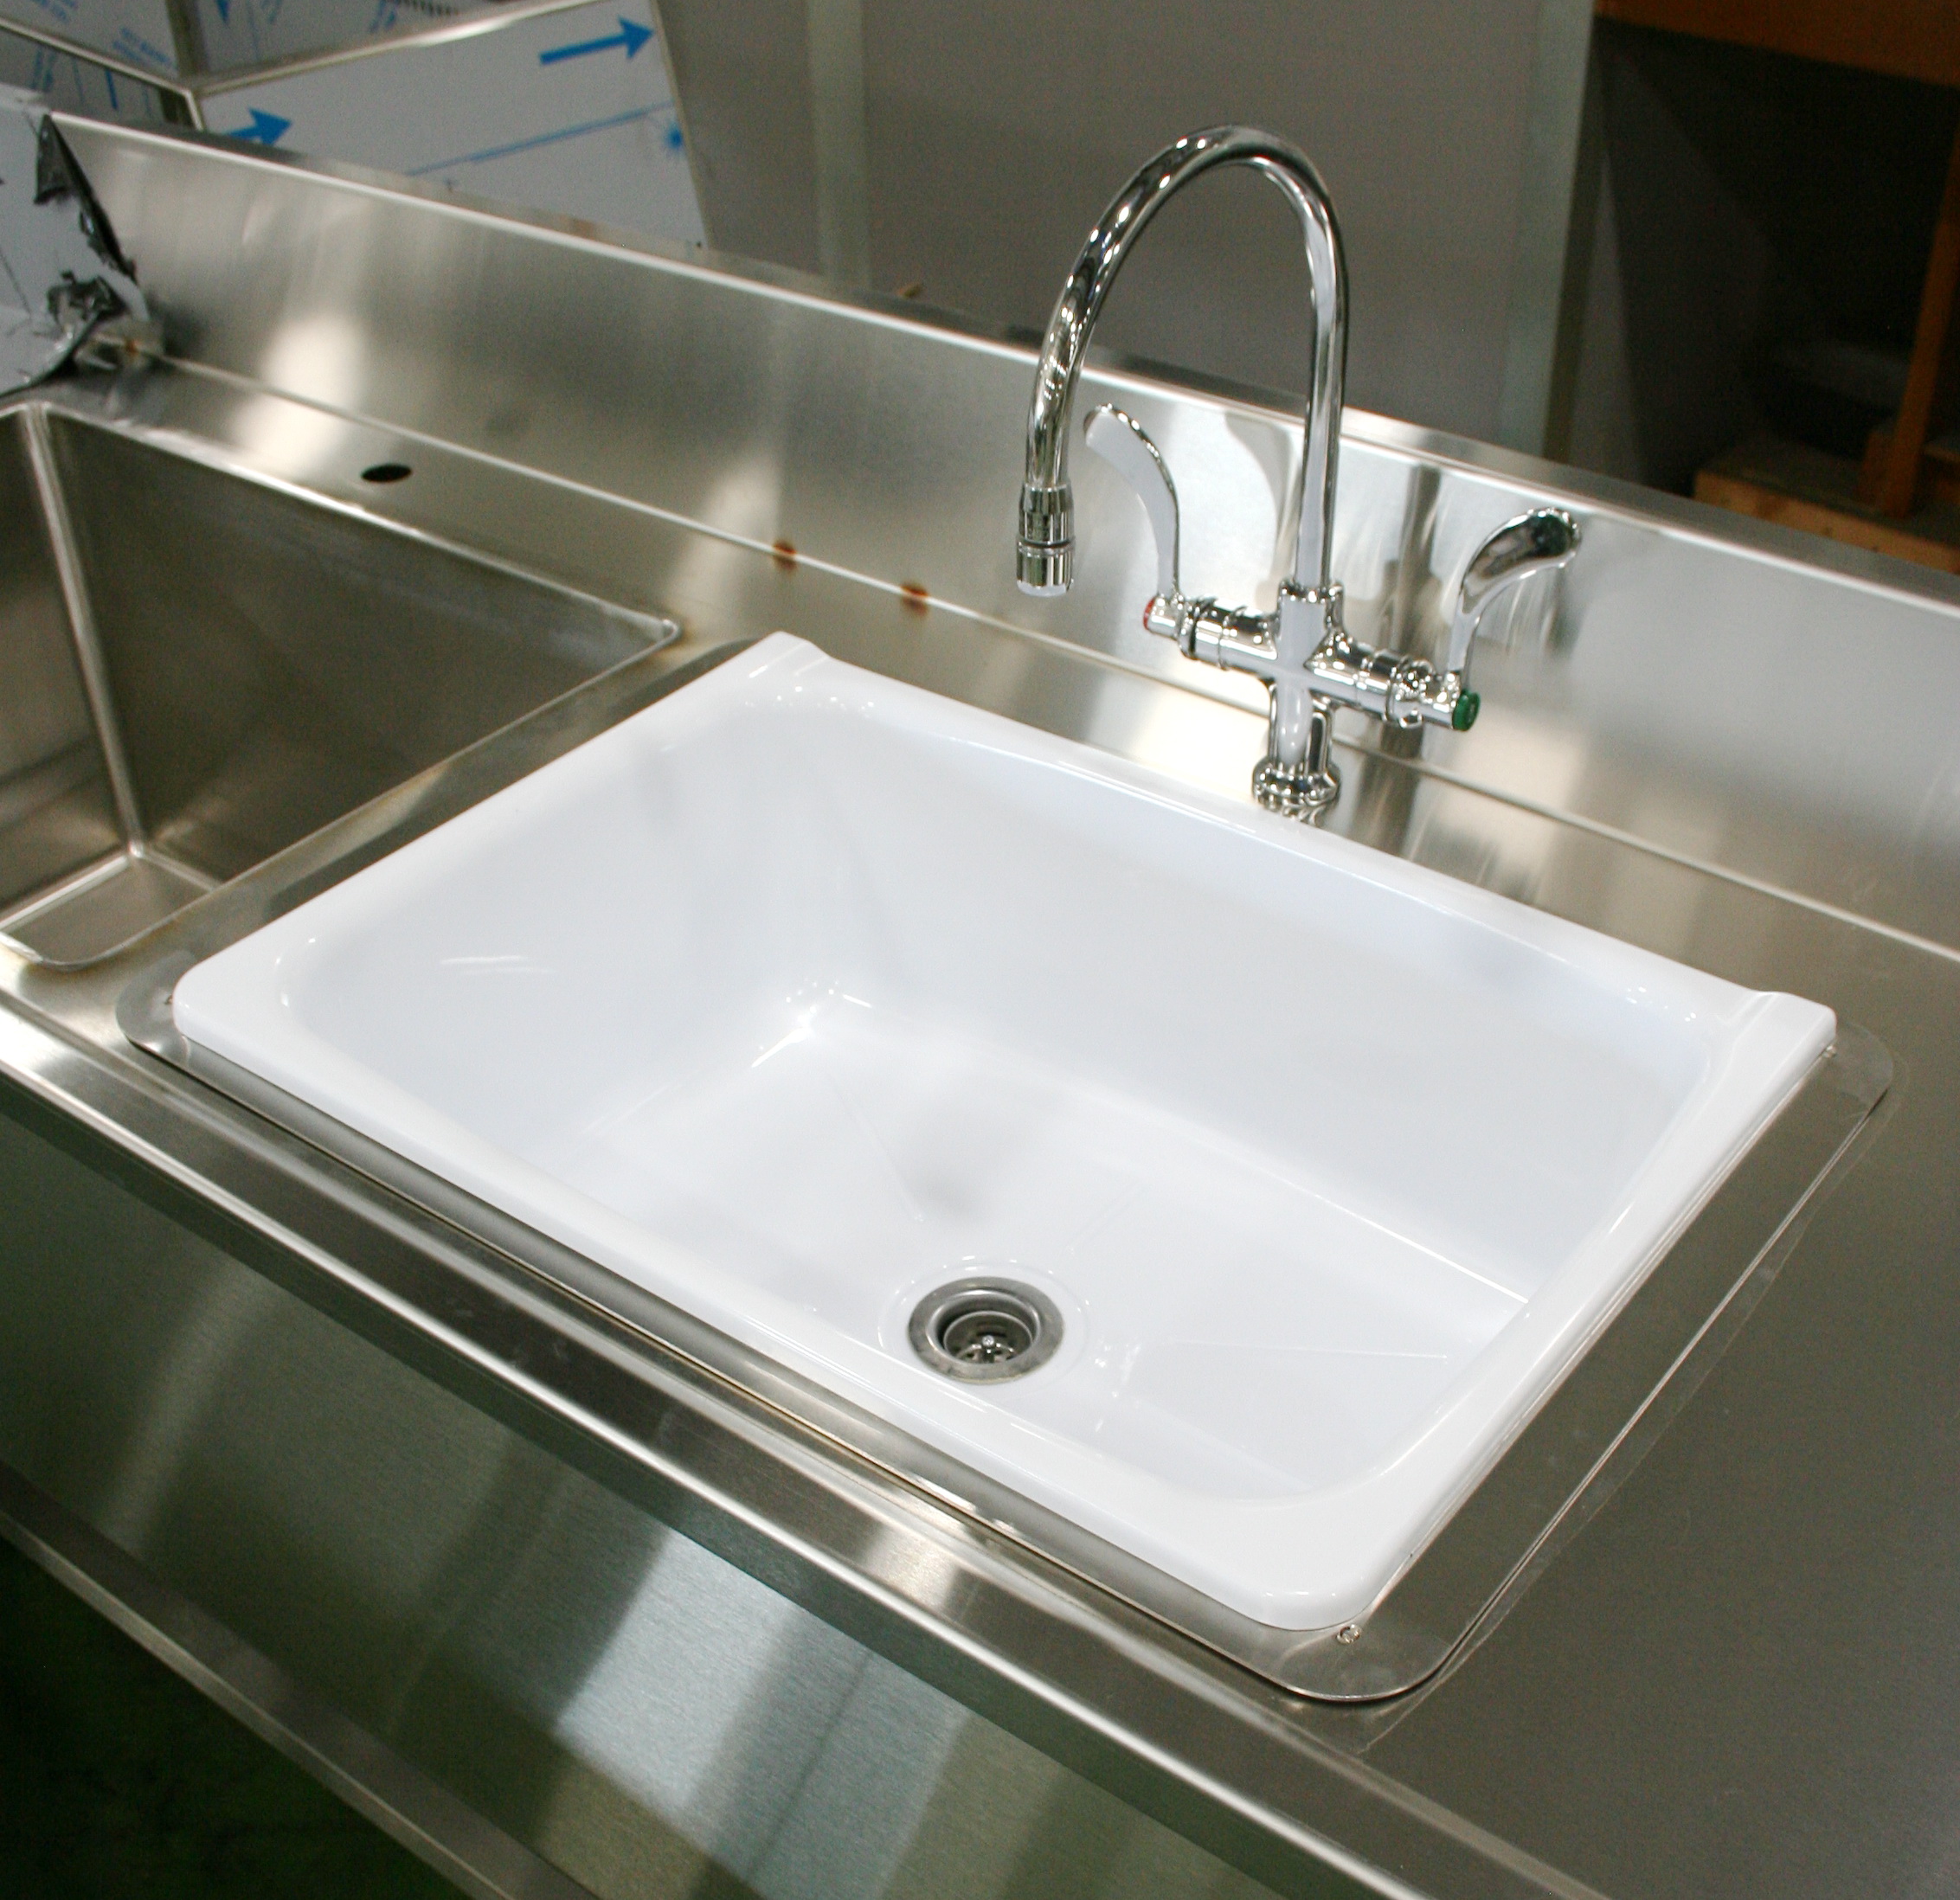 Drop-in Sink Inserts - TBJ Incorporated